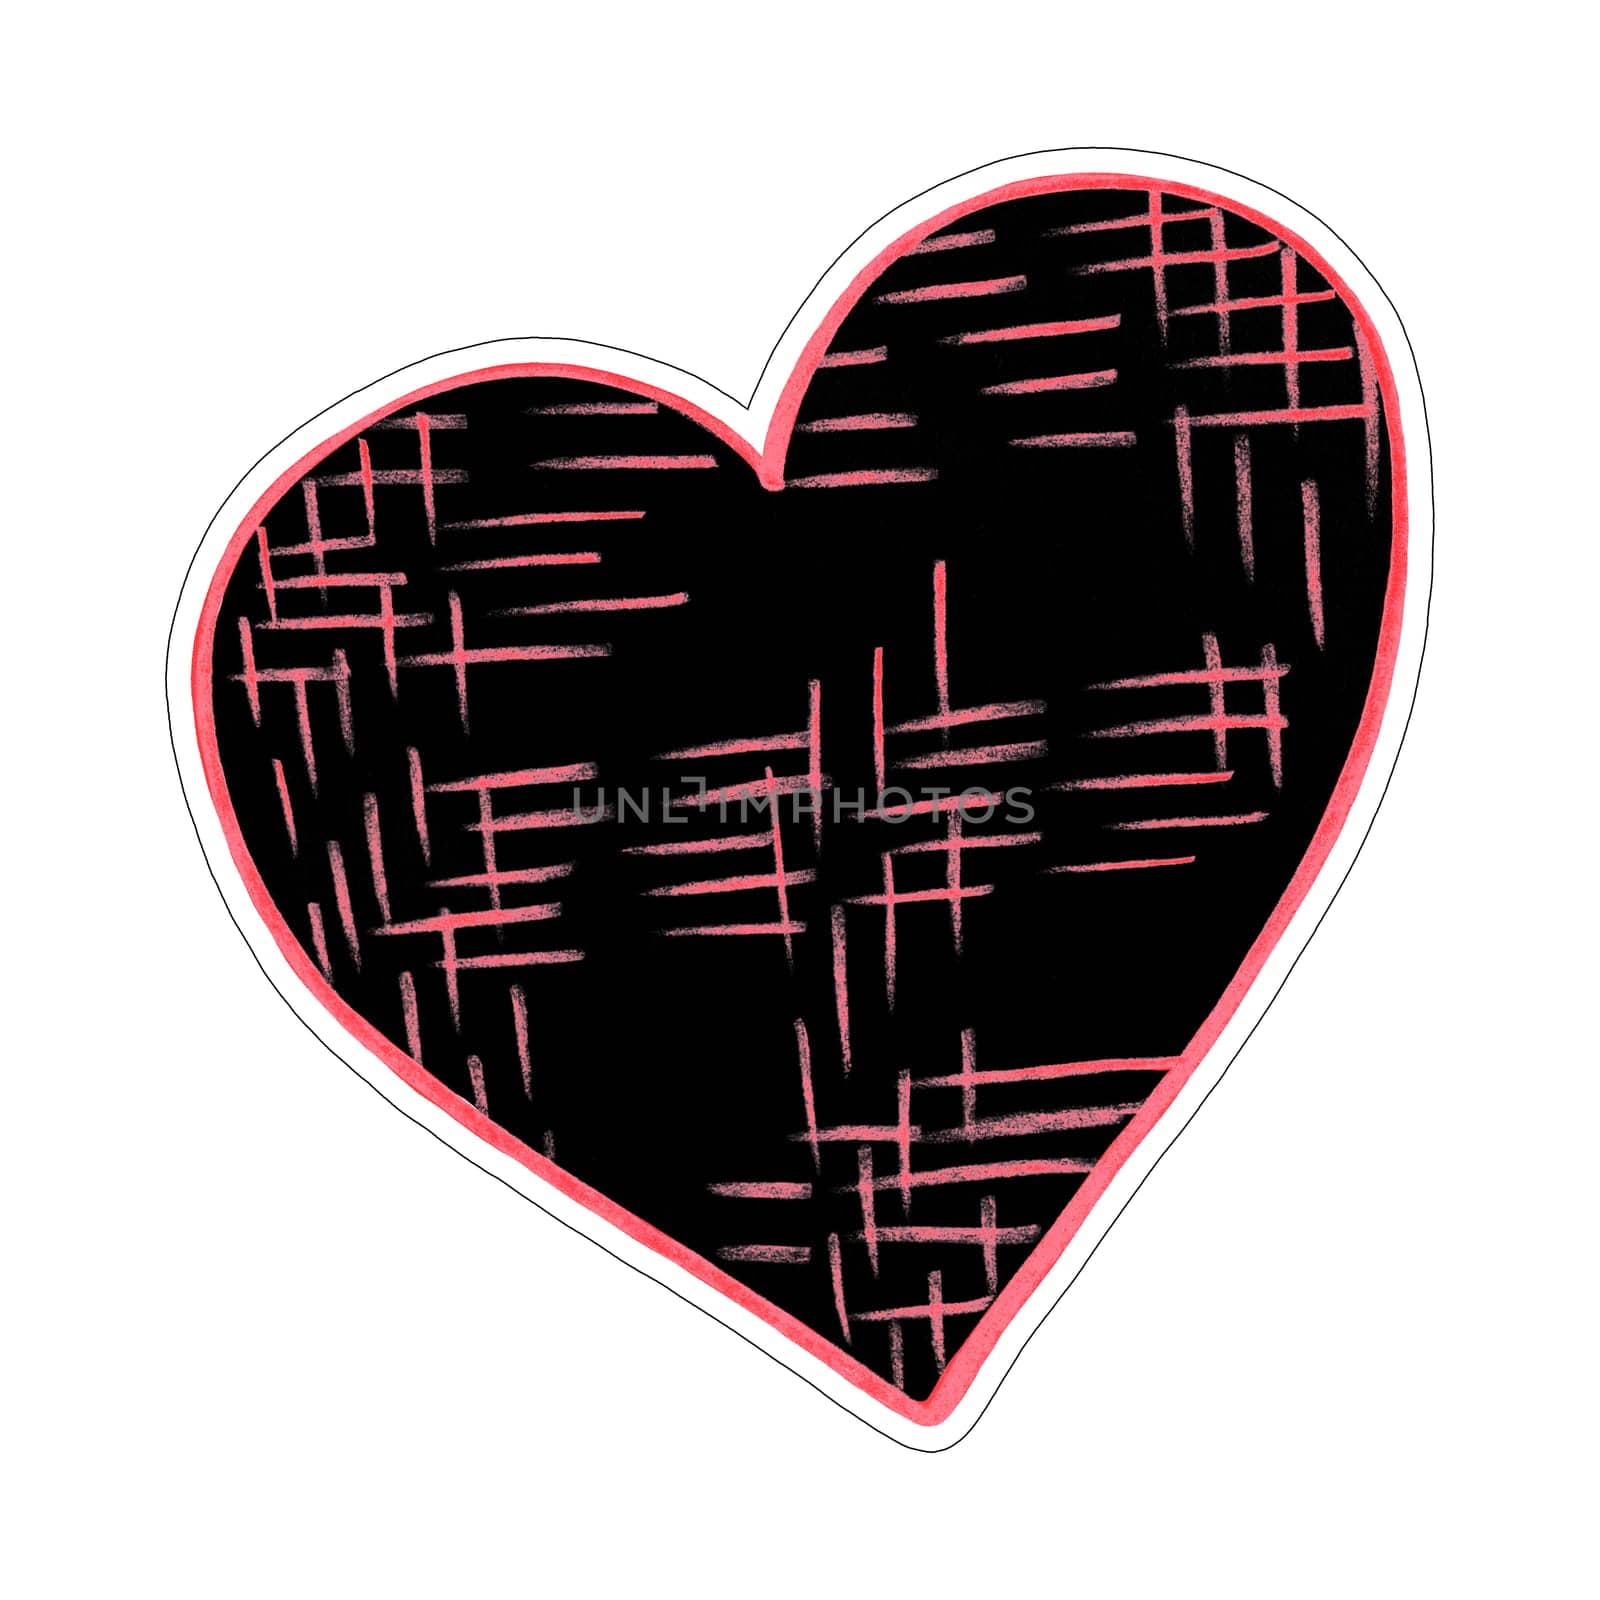 Red and Black Heart Sticker Drawn by Colored Pencil. Heart Shape Isolated on White Background. by Rina_Dozornaya